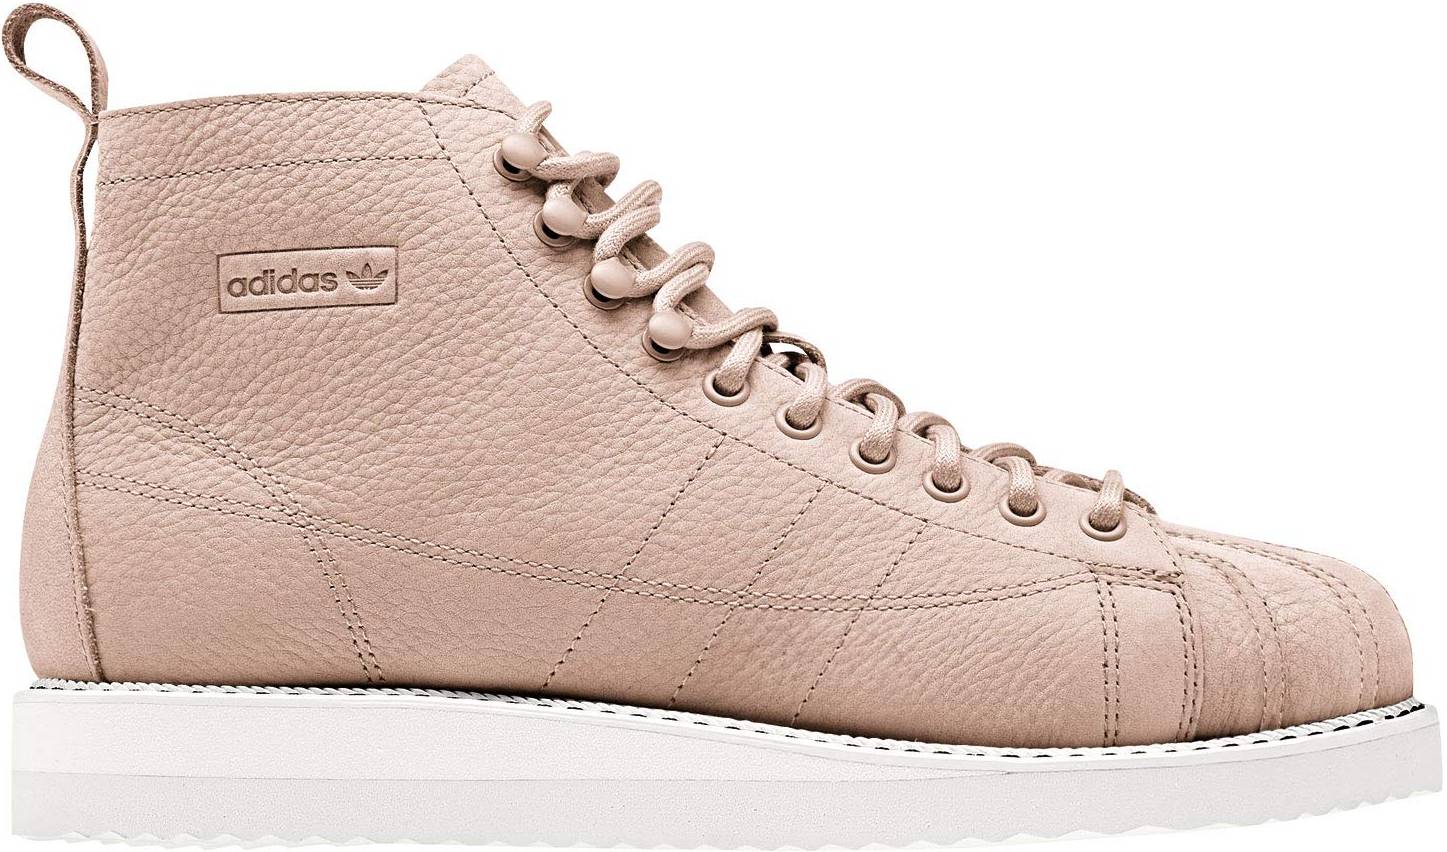 are adidas superstars real leather